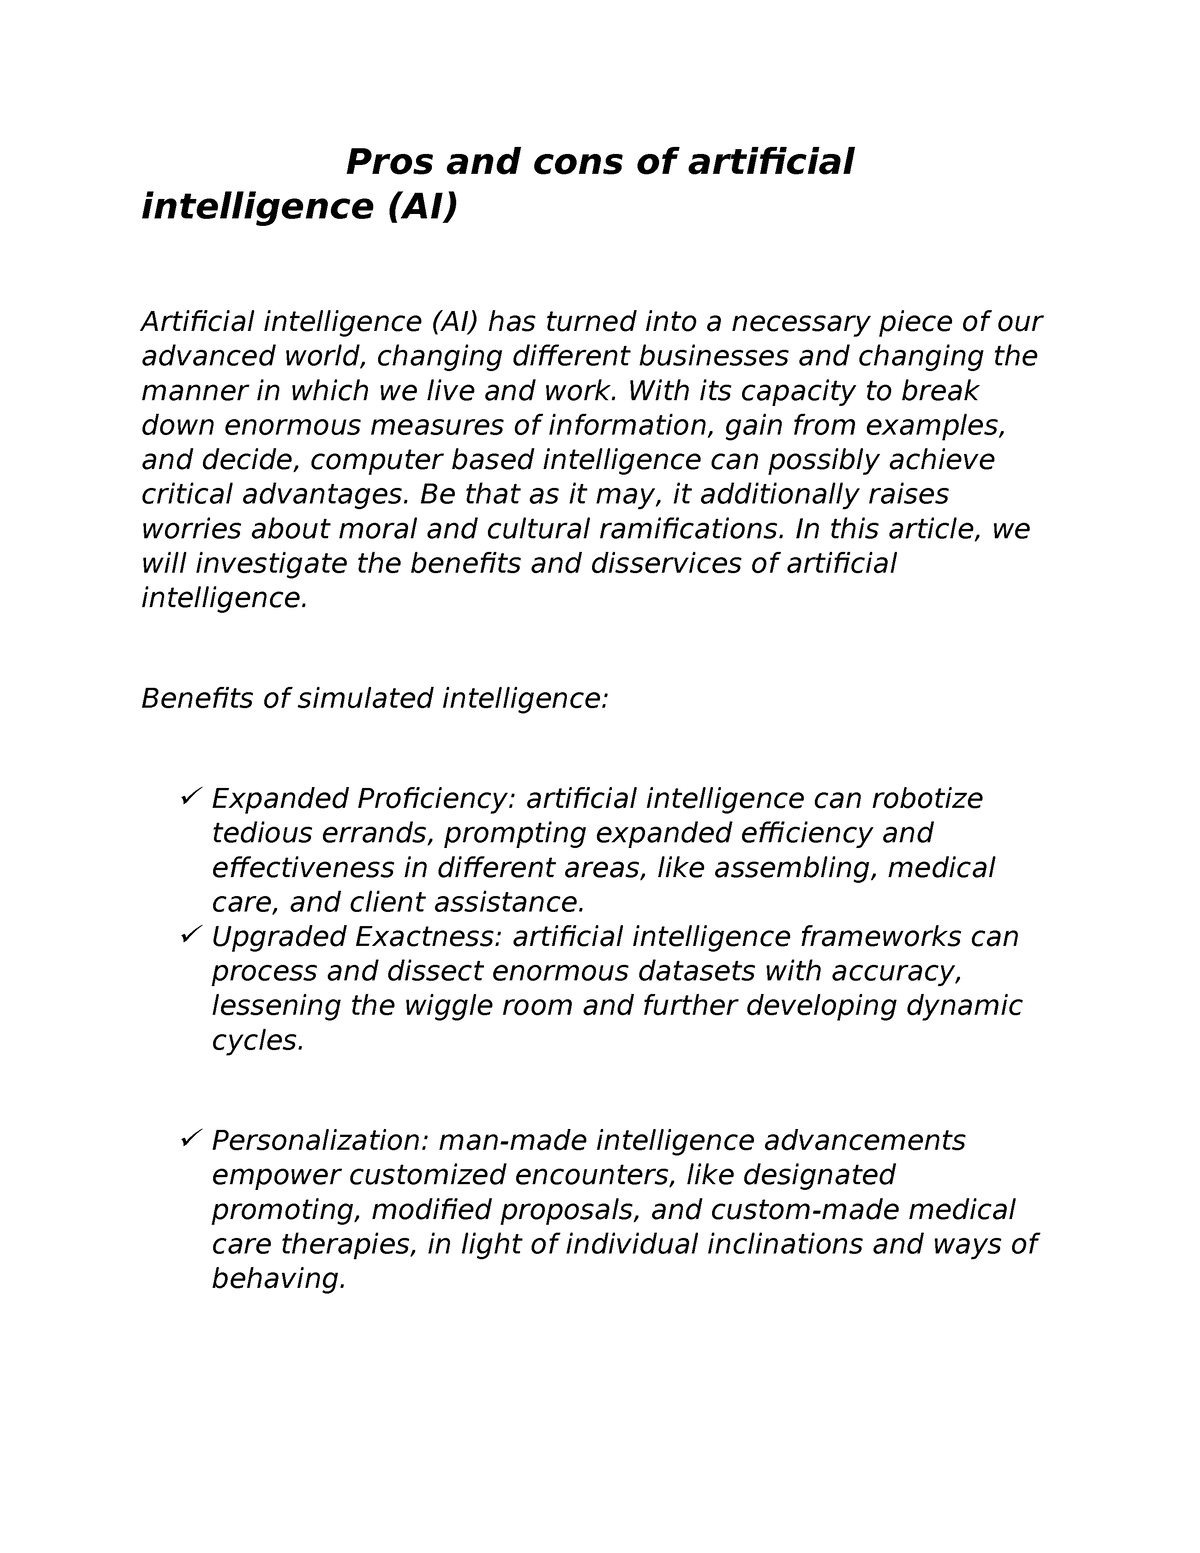 essay on artificial intelligence pros and cons